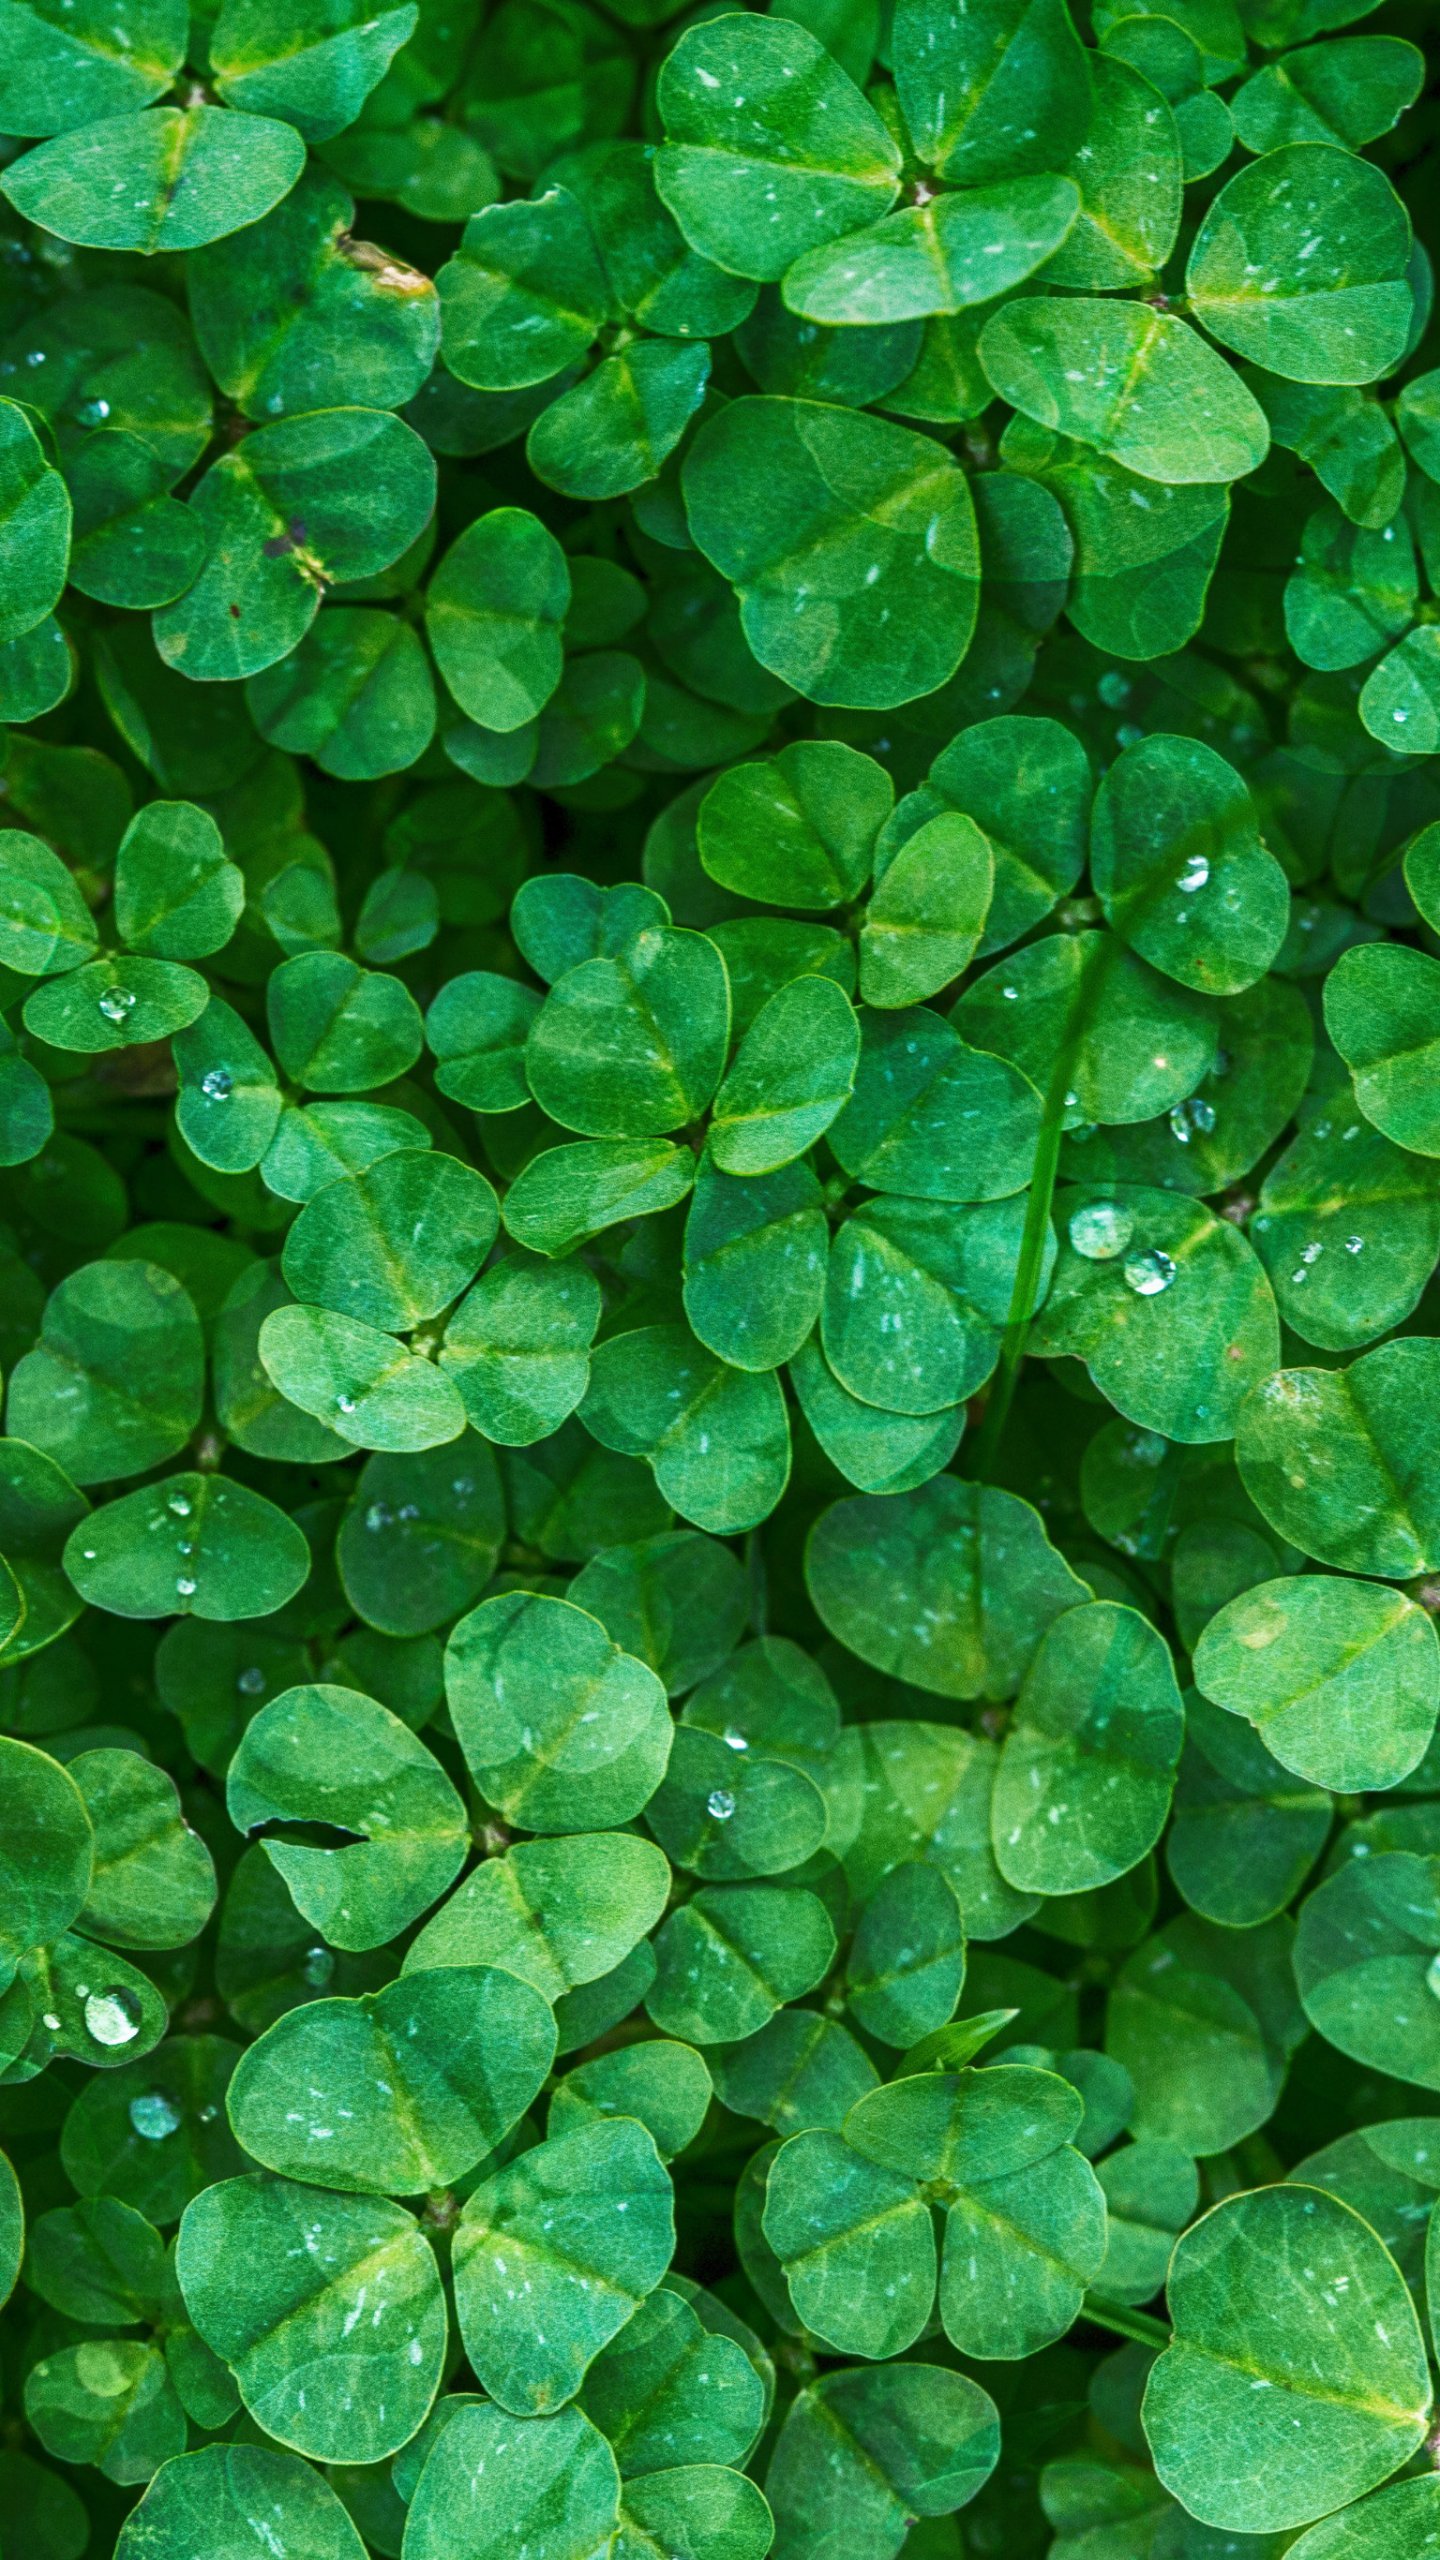 Free Download Irish Clovers Wallpaper Iphone Android Desktop Backgrounds 1440x2560 For Your Desktop Mobile Tablet Explore 46 Android 4 Leaves Clover Wallpapers 4 Leaf Clover Wallpaper Android 4 4 Kitkat Wallpaper Clover Wallpaper